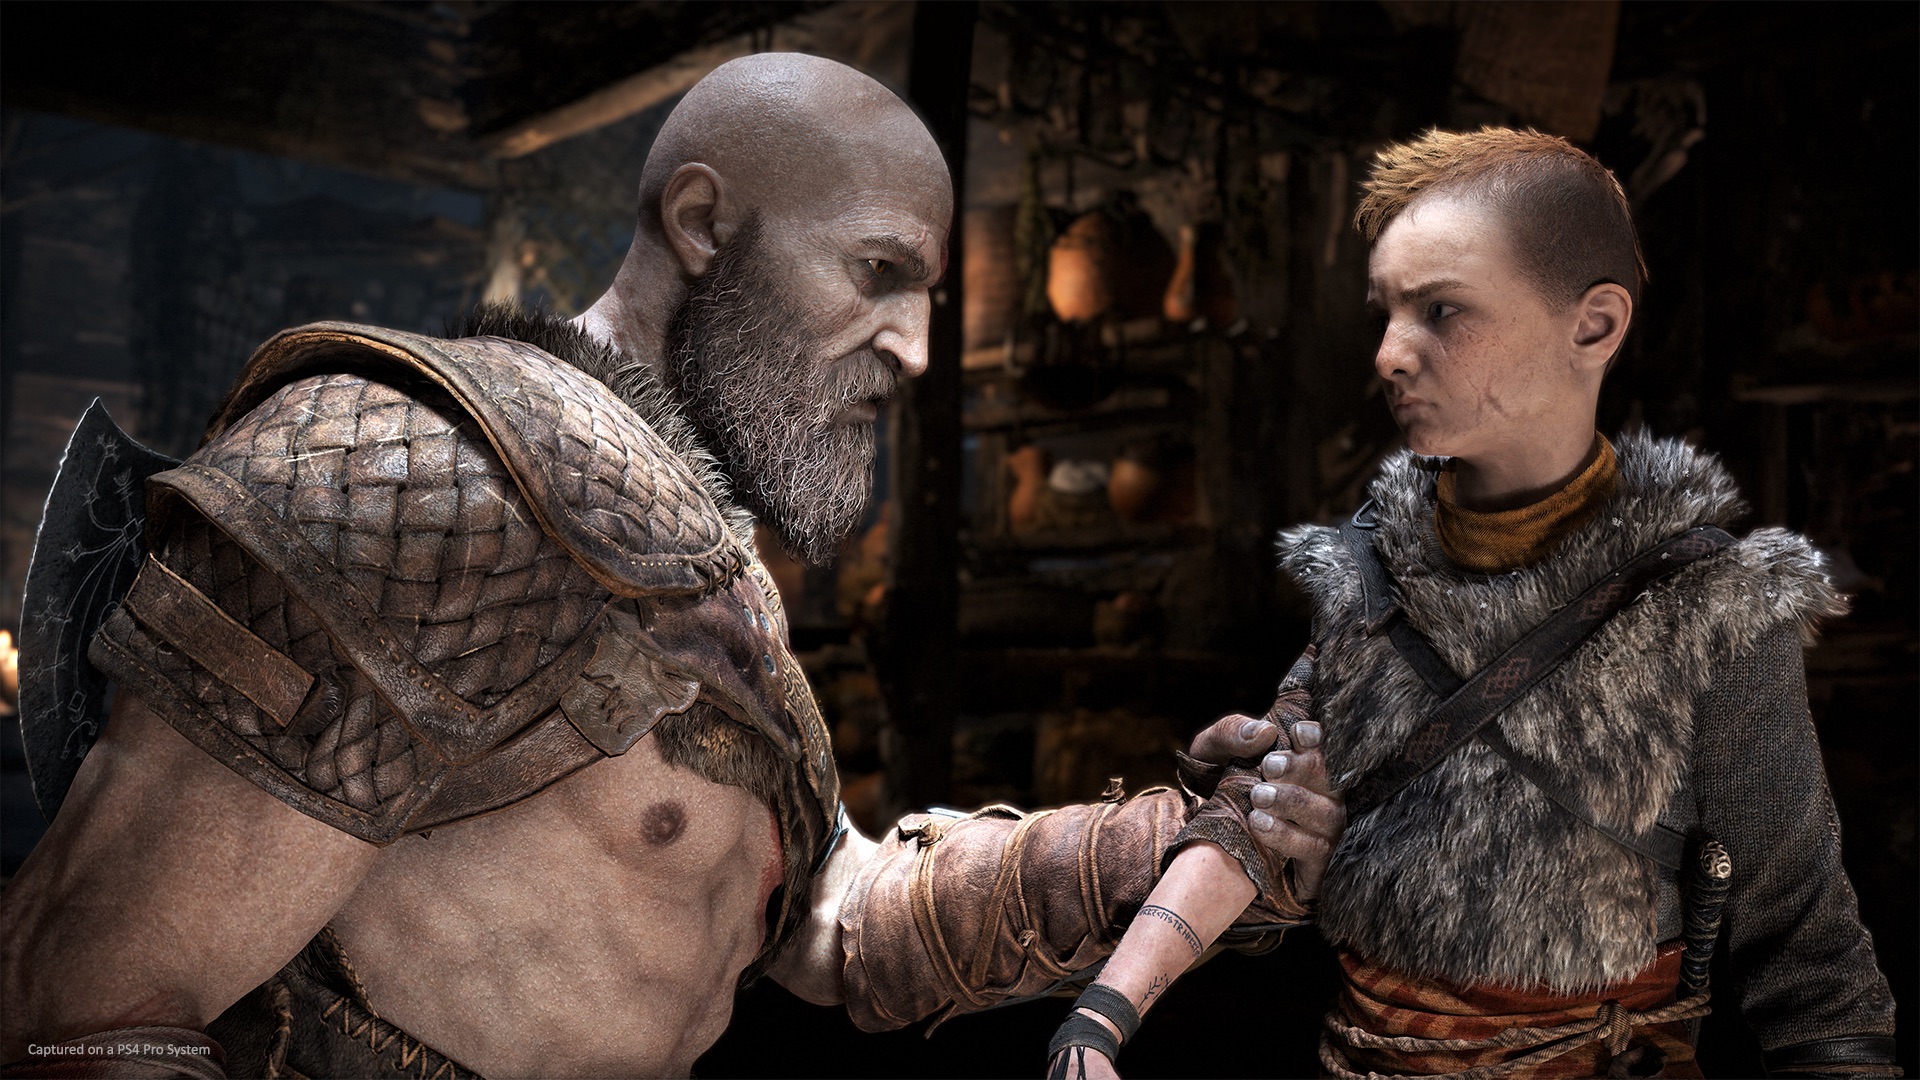 Kratos and his son Atreus in the new God of War game for the PS4 (Courtesy of Sony)